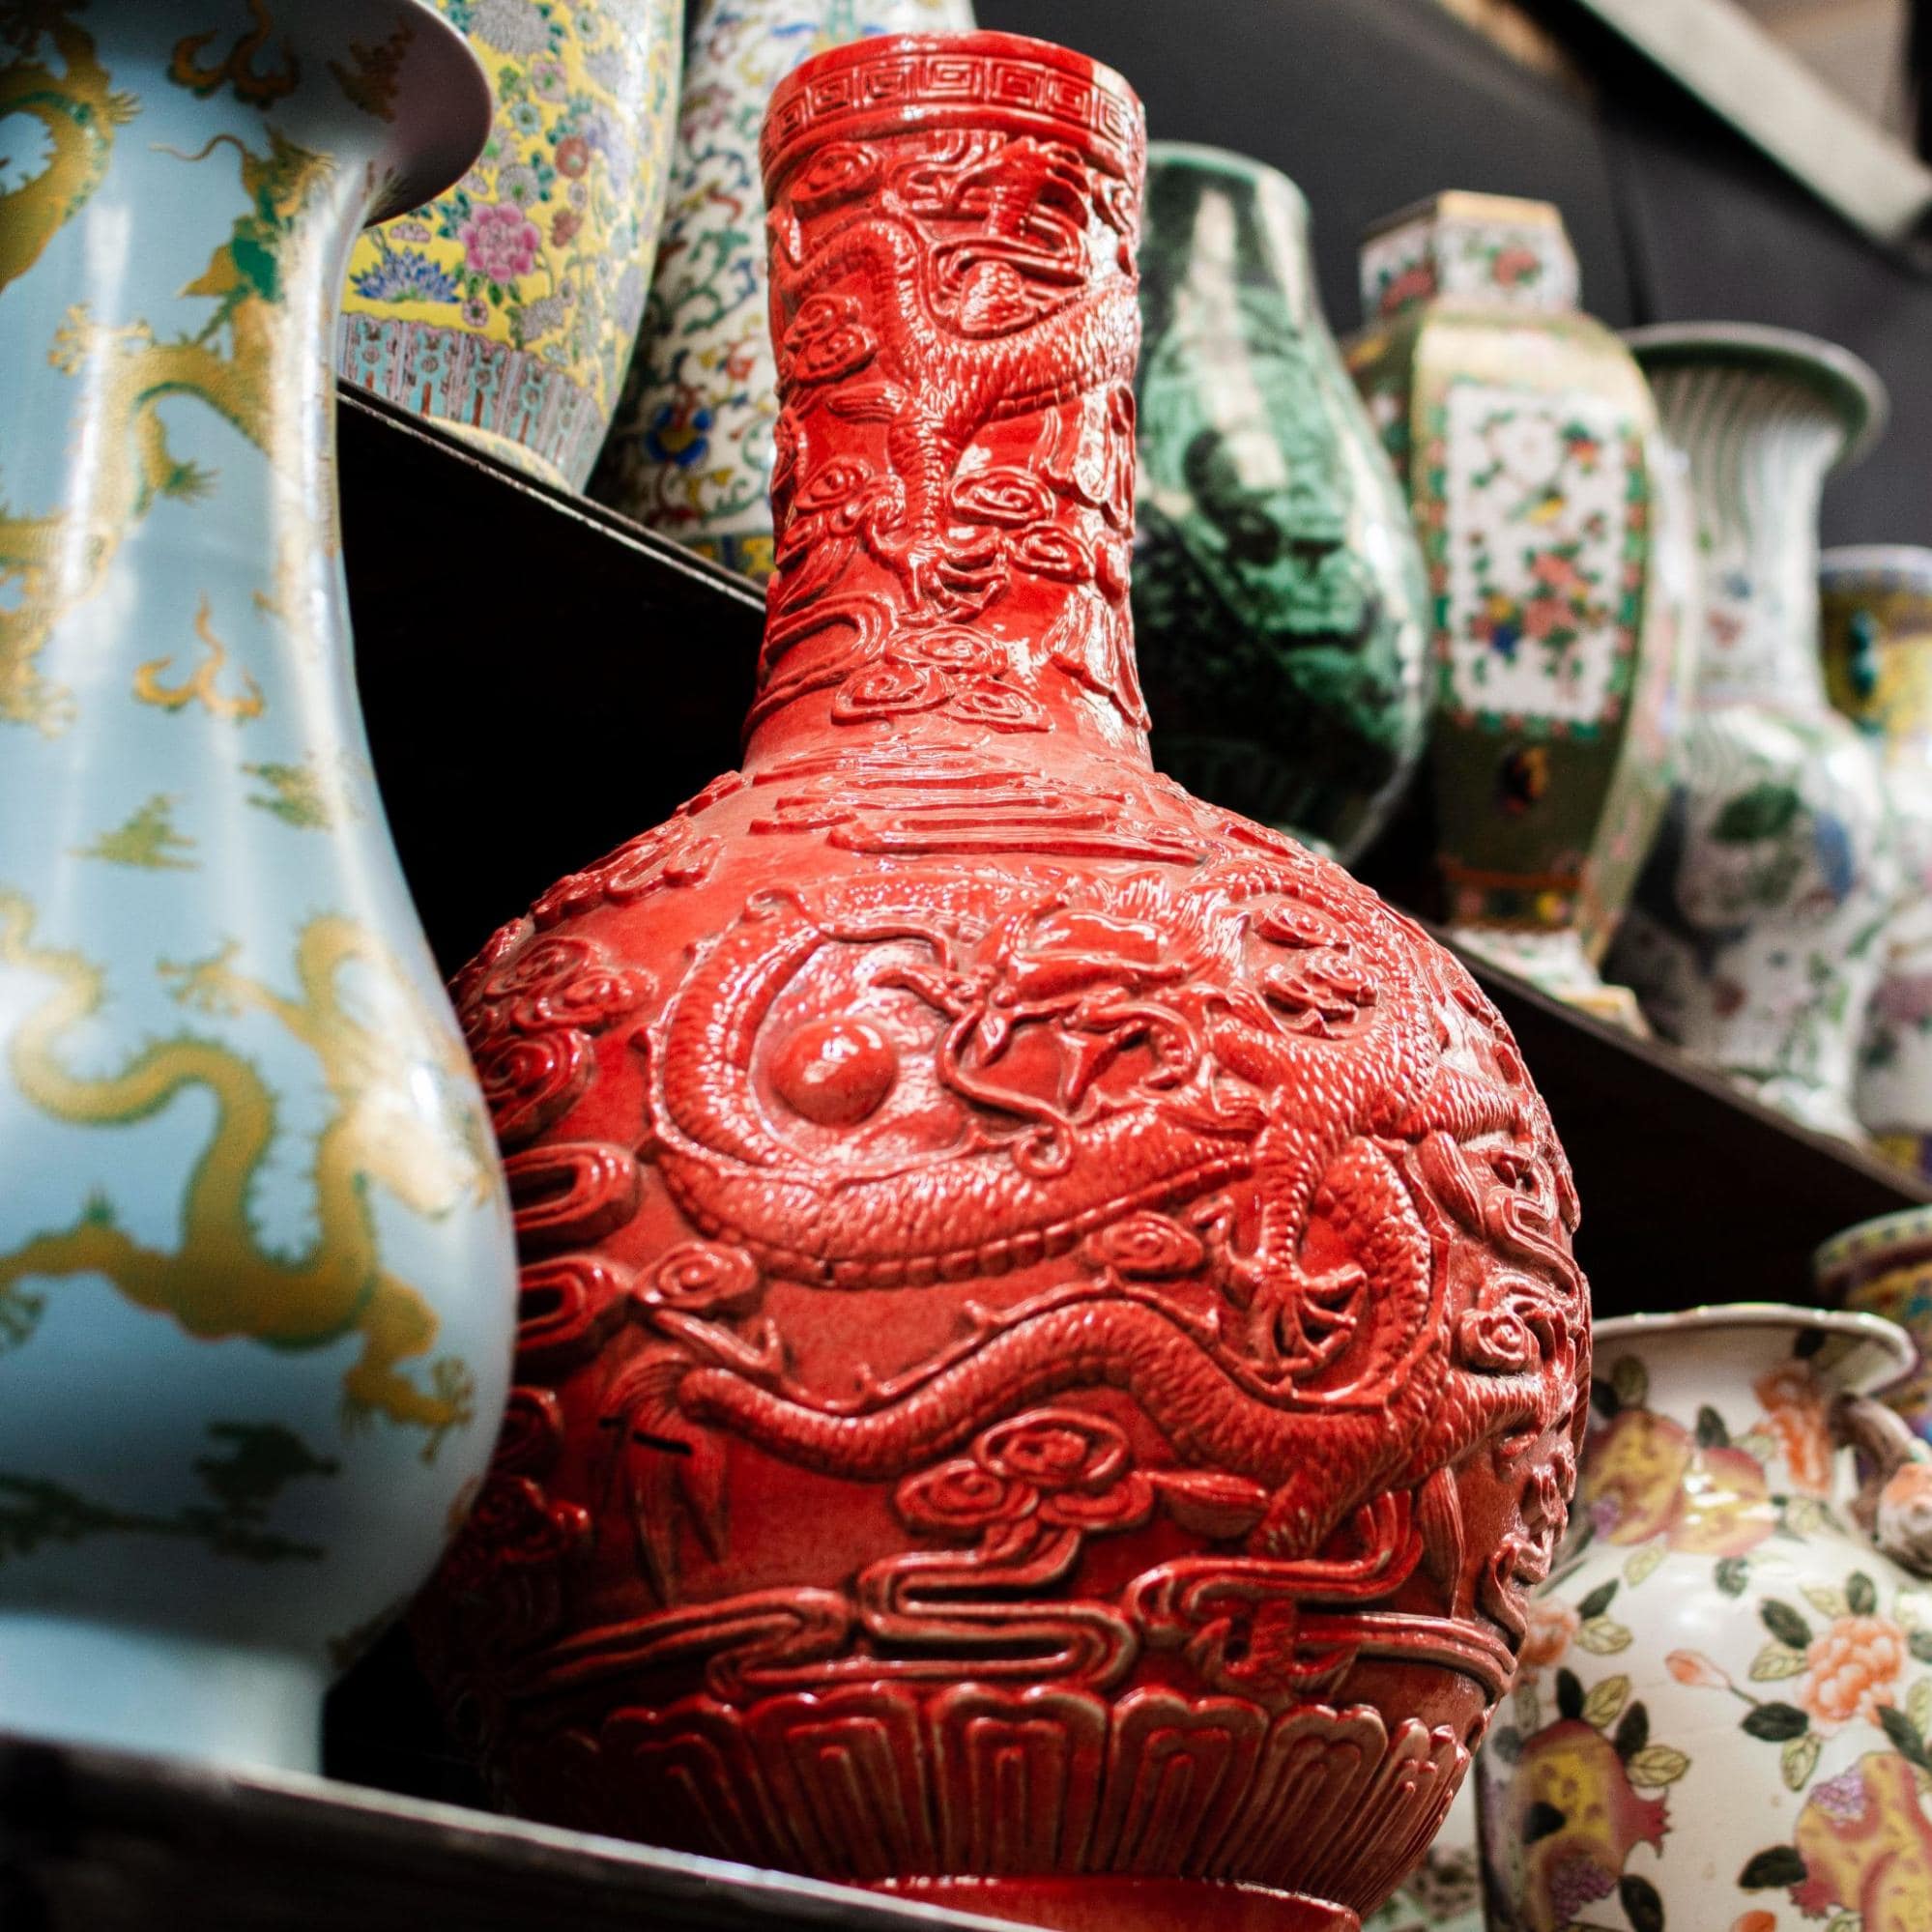 Chinese New Year gifts feature hand-painted ceramic vases with dragon designs, showcasing exceptional artistry.